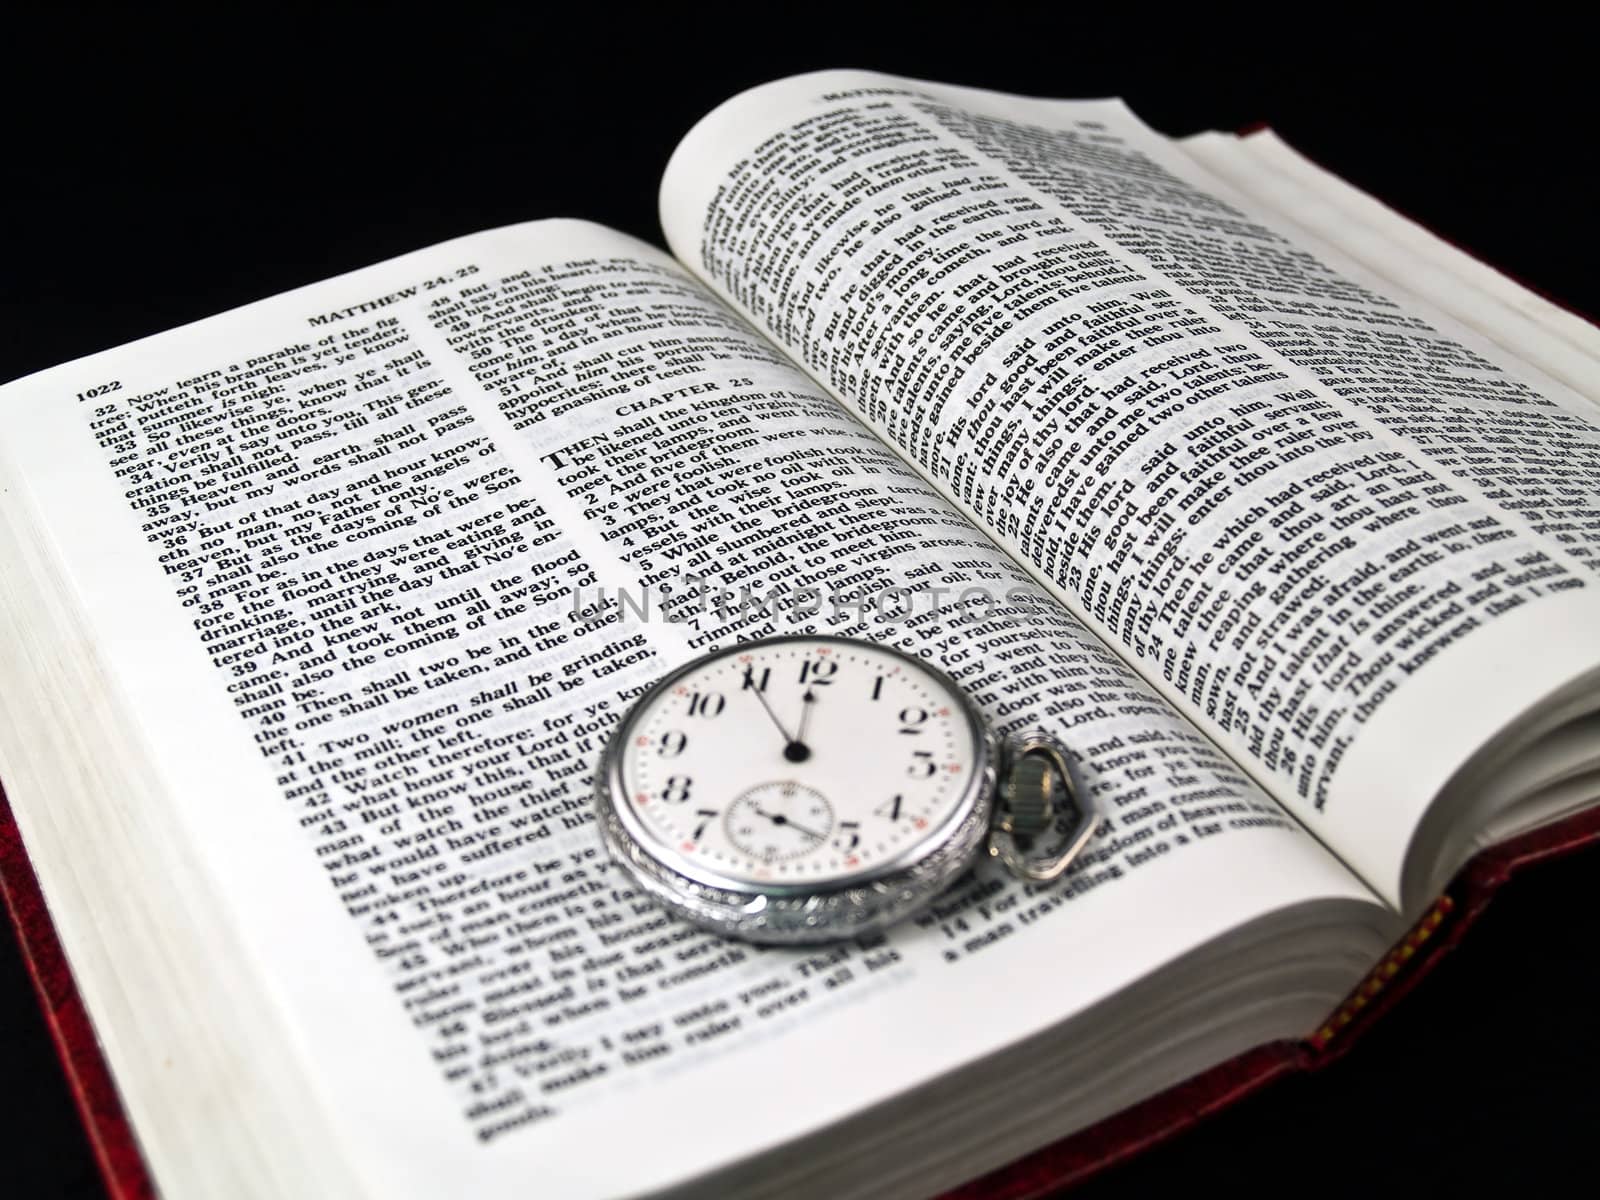 The Bible opened to Matthew 24: 36 with a Pocketwatch by Frankljunior